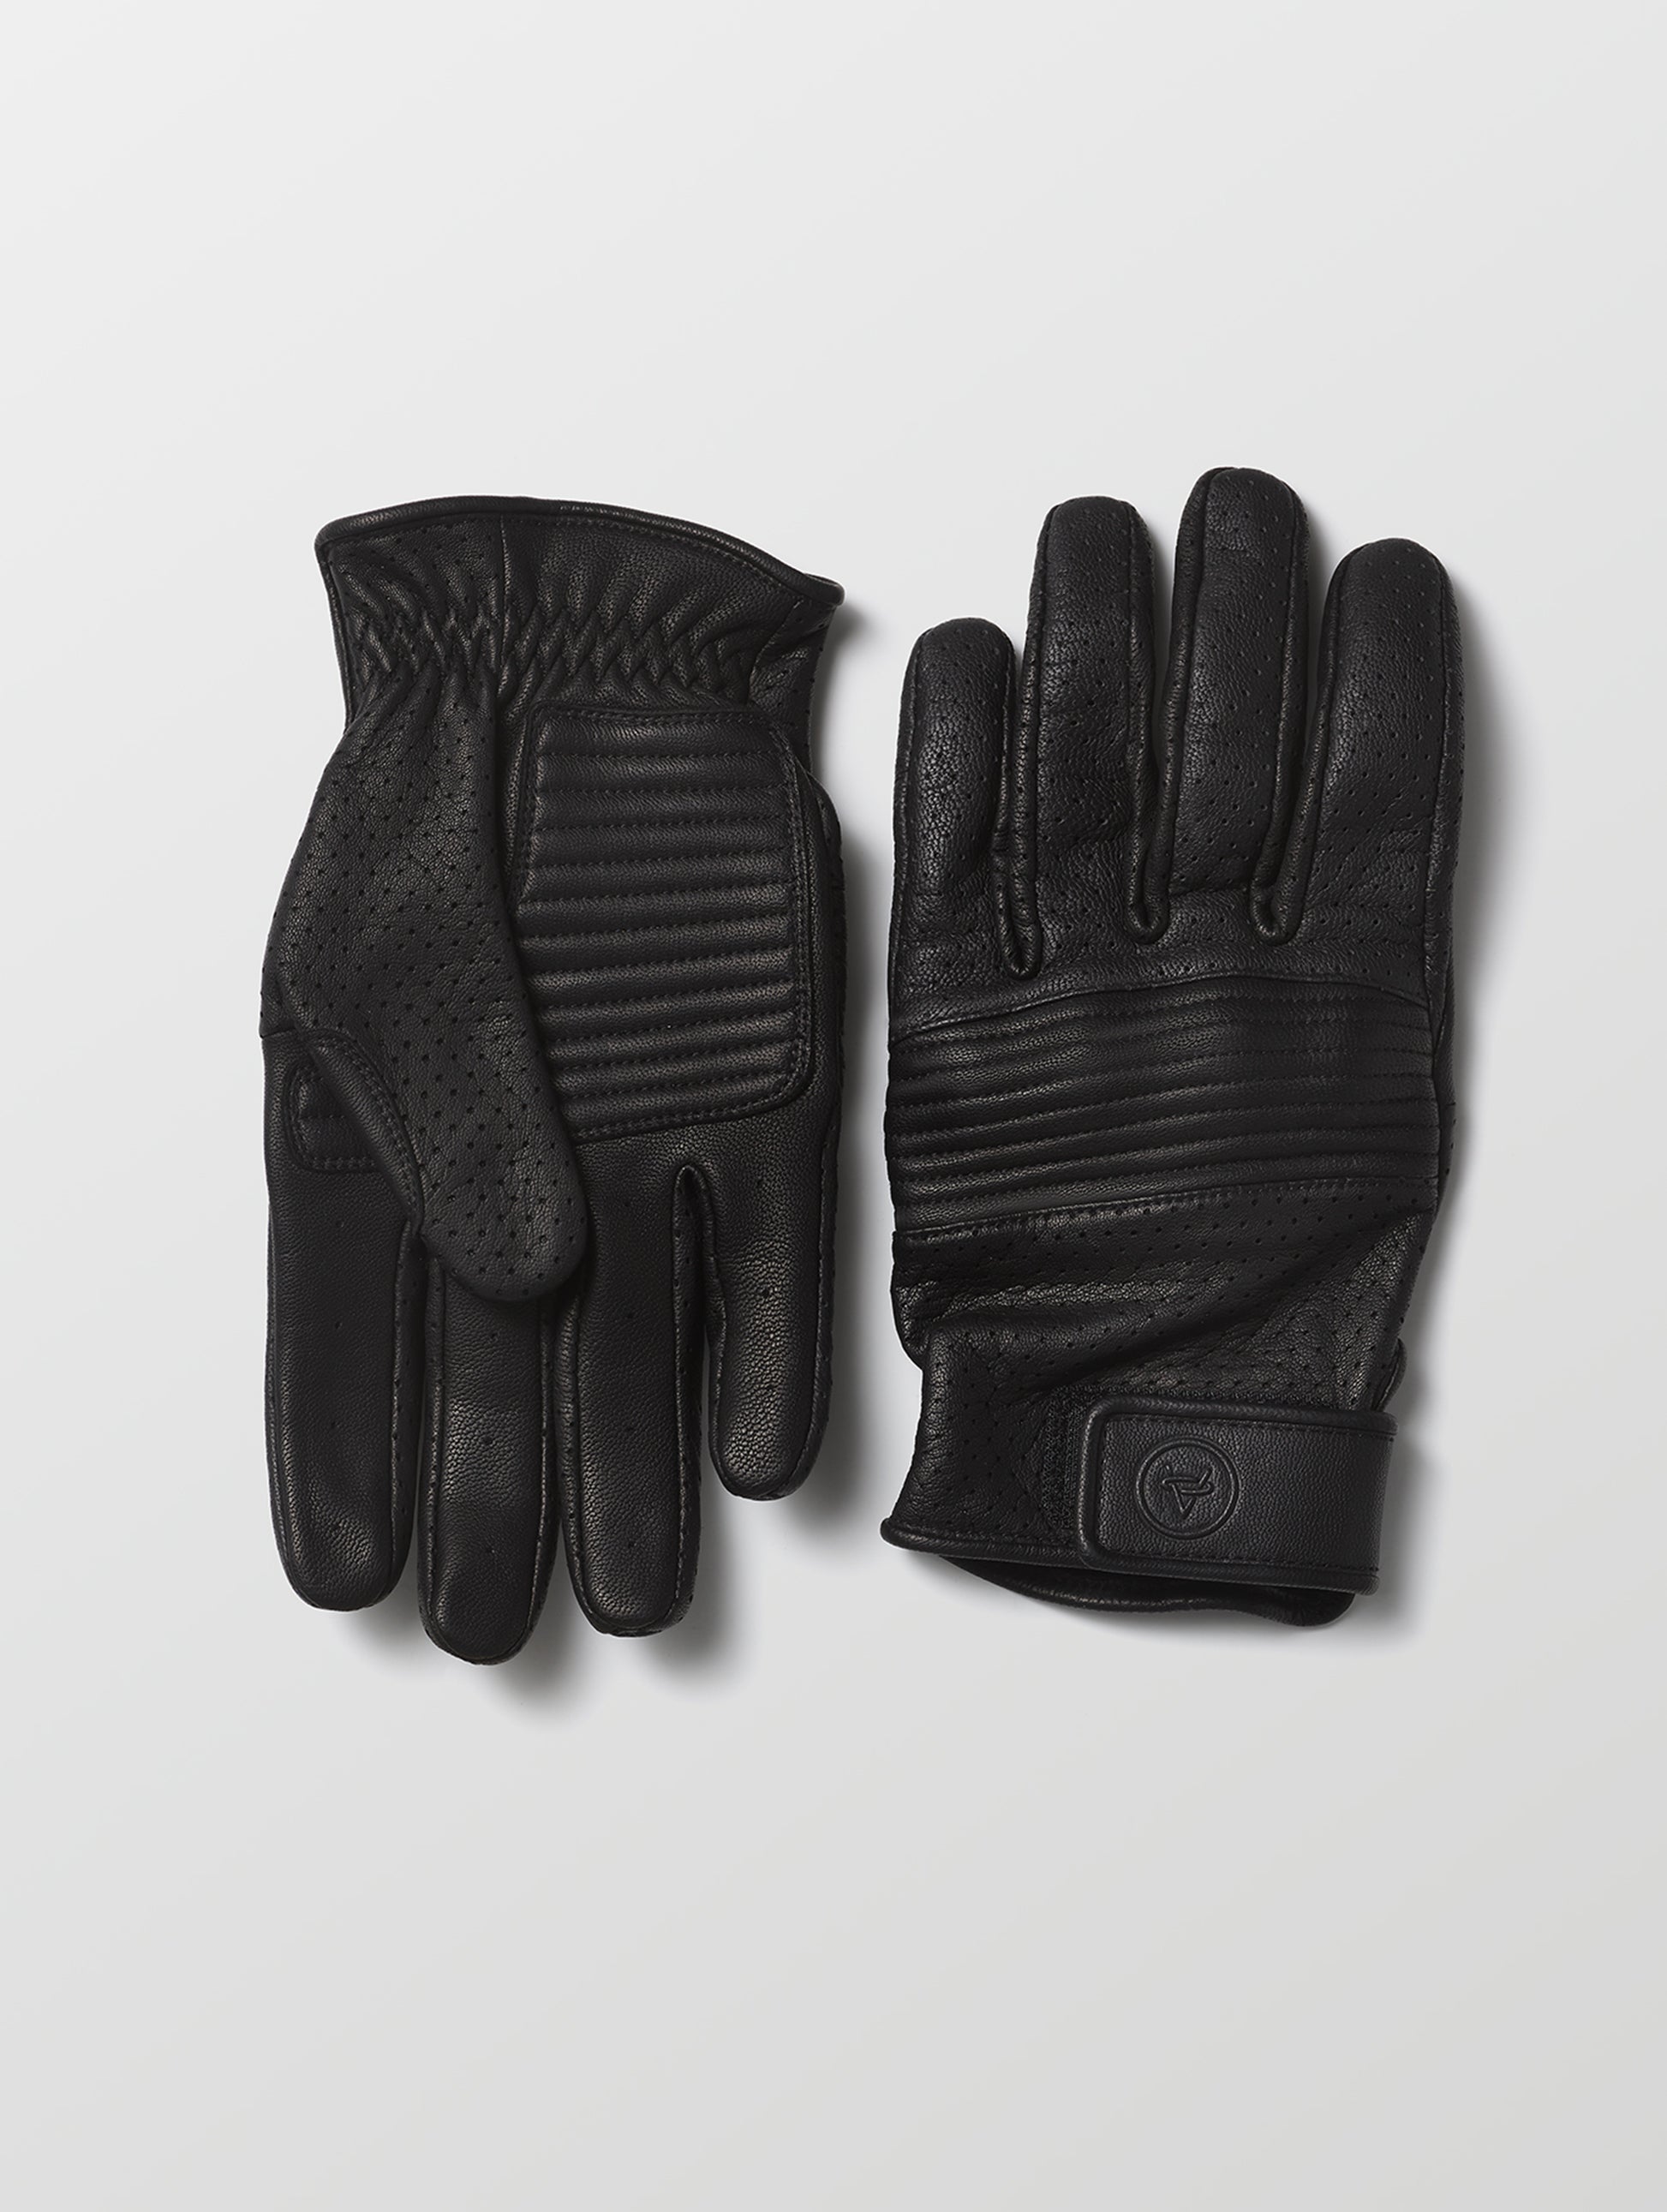 Pair of black motorcycle gloves from AETHER Apparel